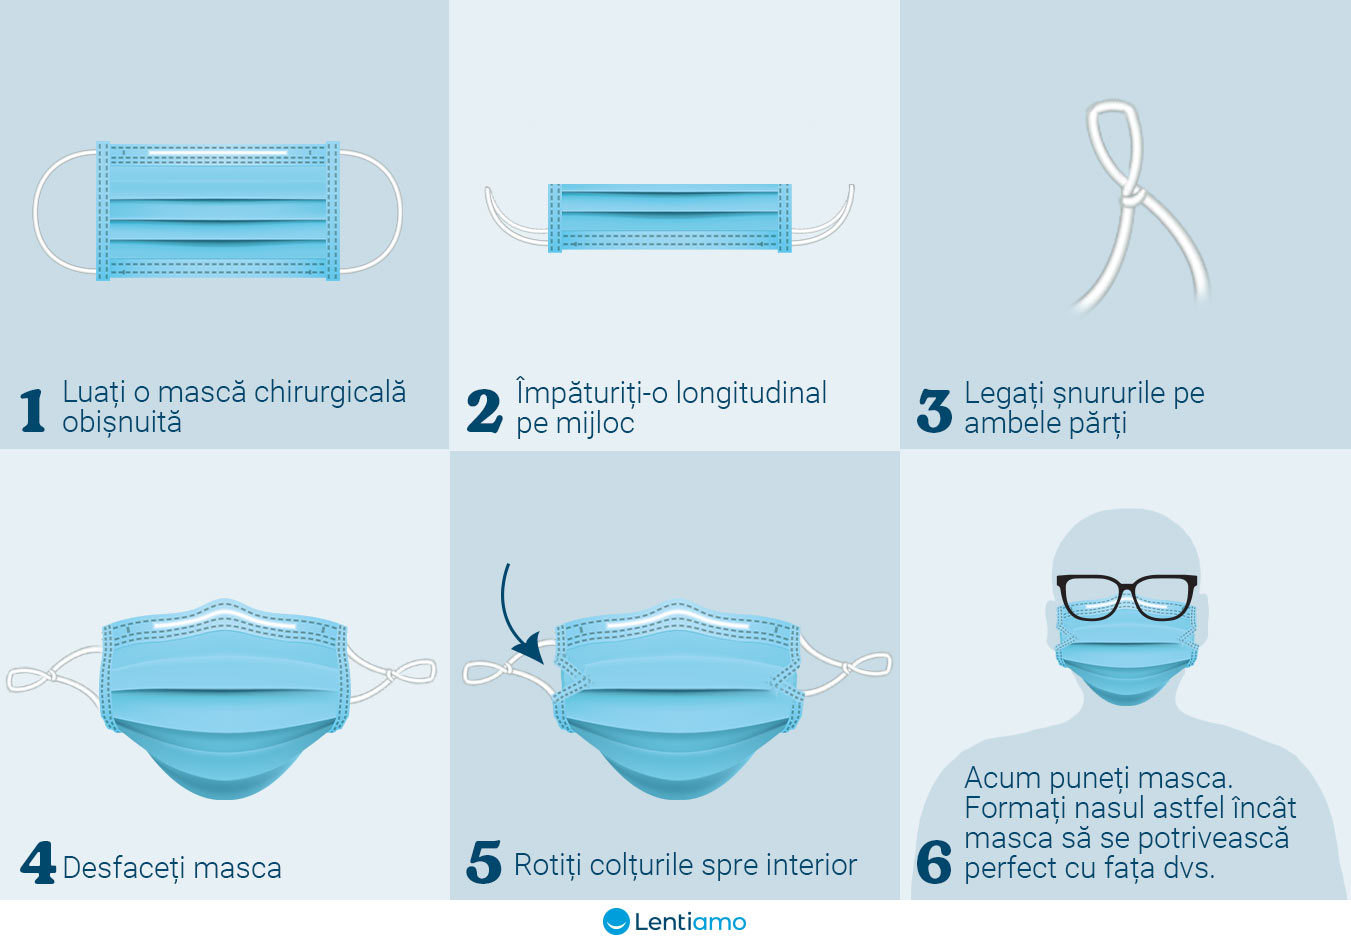 how to fold mask